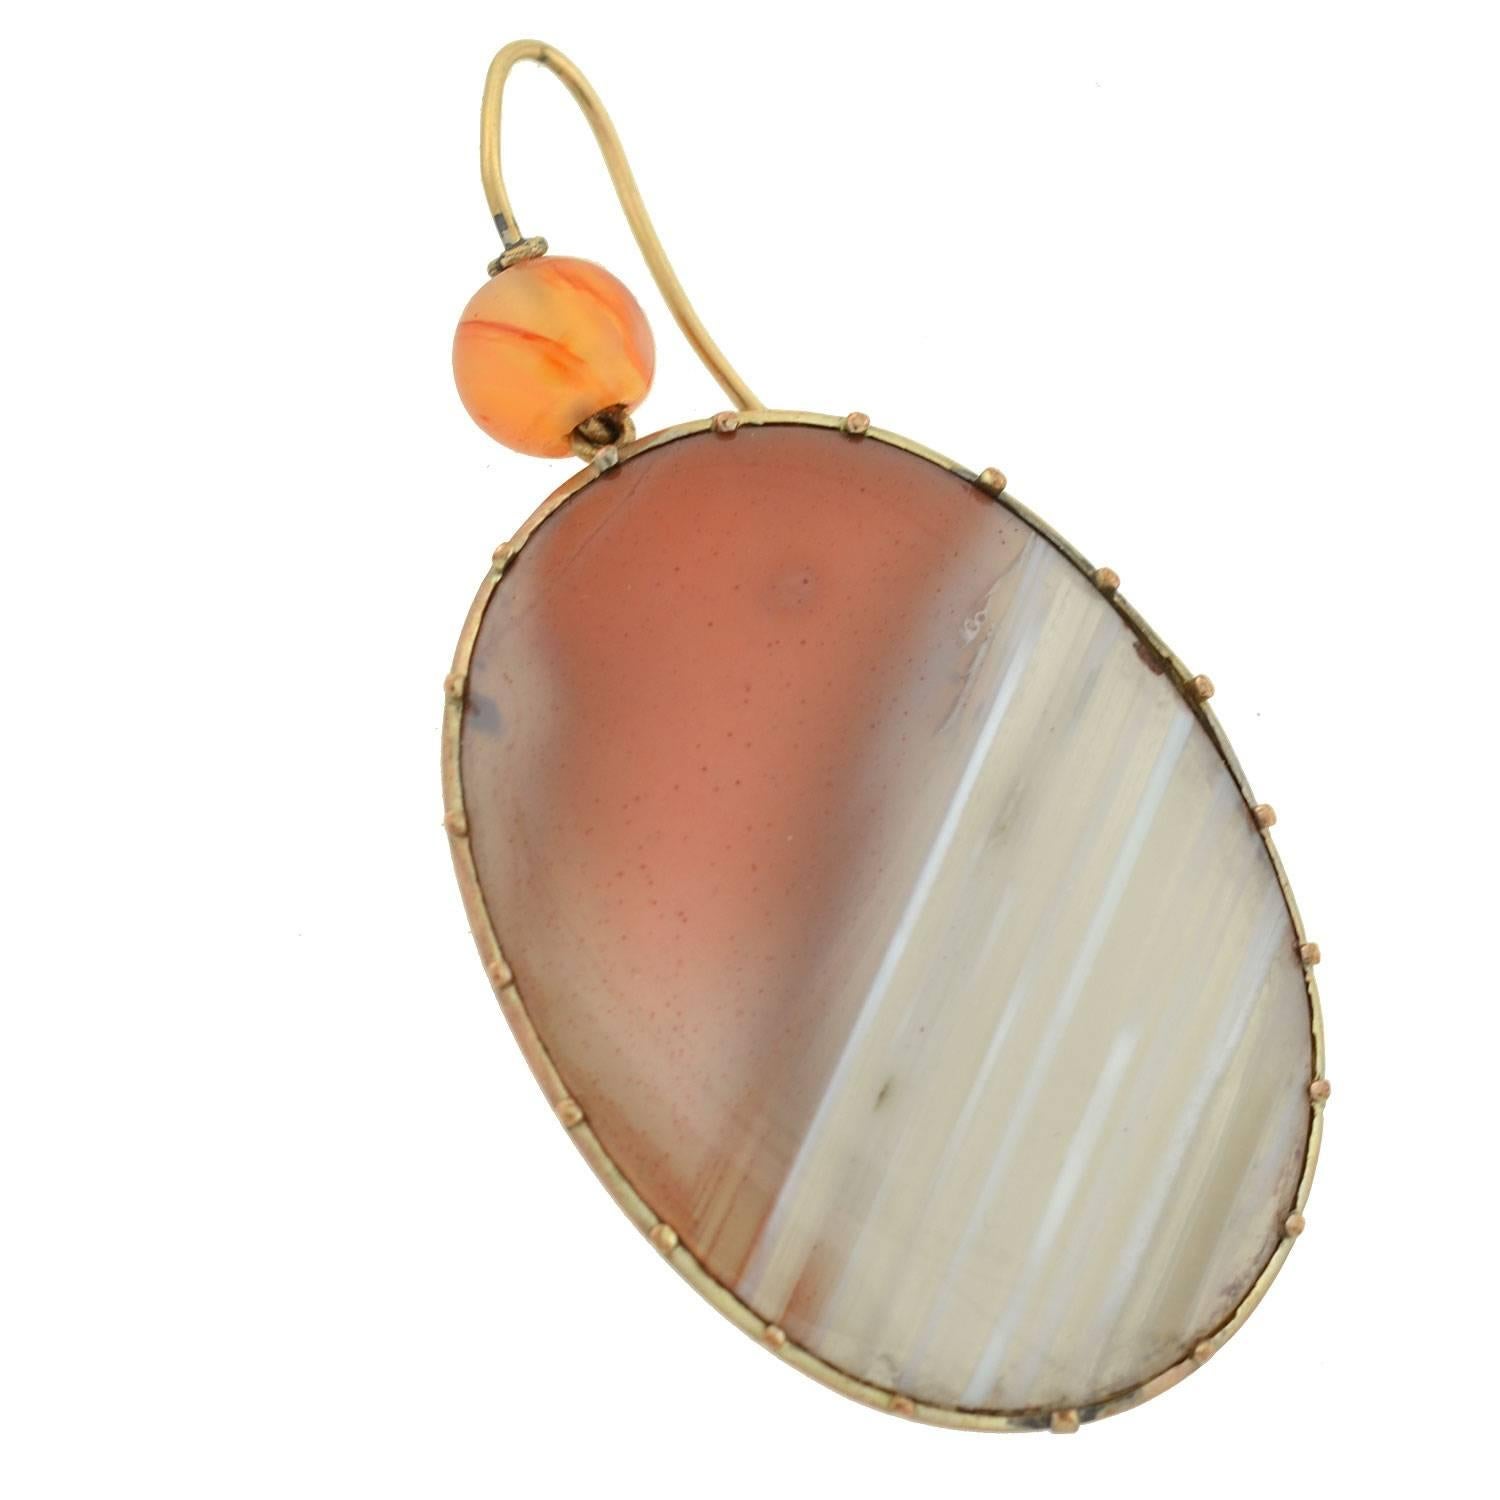 Wonderful and unusual carnelian agate earrings from the Victorian (ca1880) era! Each earring begins with a smooth ball of carnelian which has a 15kt yellow gold wire riveting through the center and attaches to a gold earring wire. Swinging from the